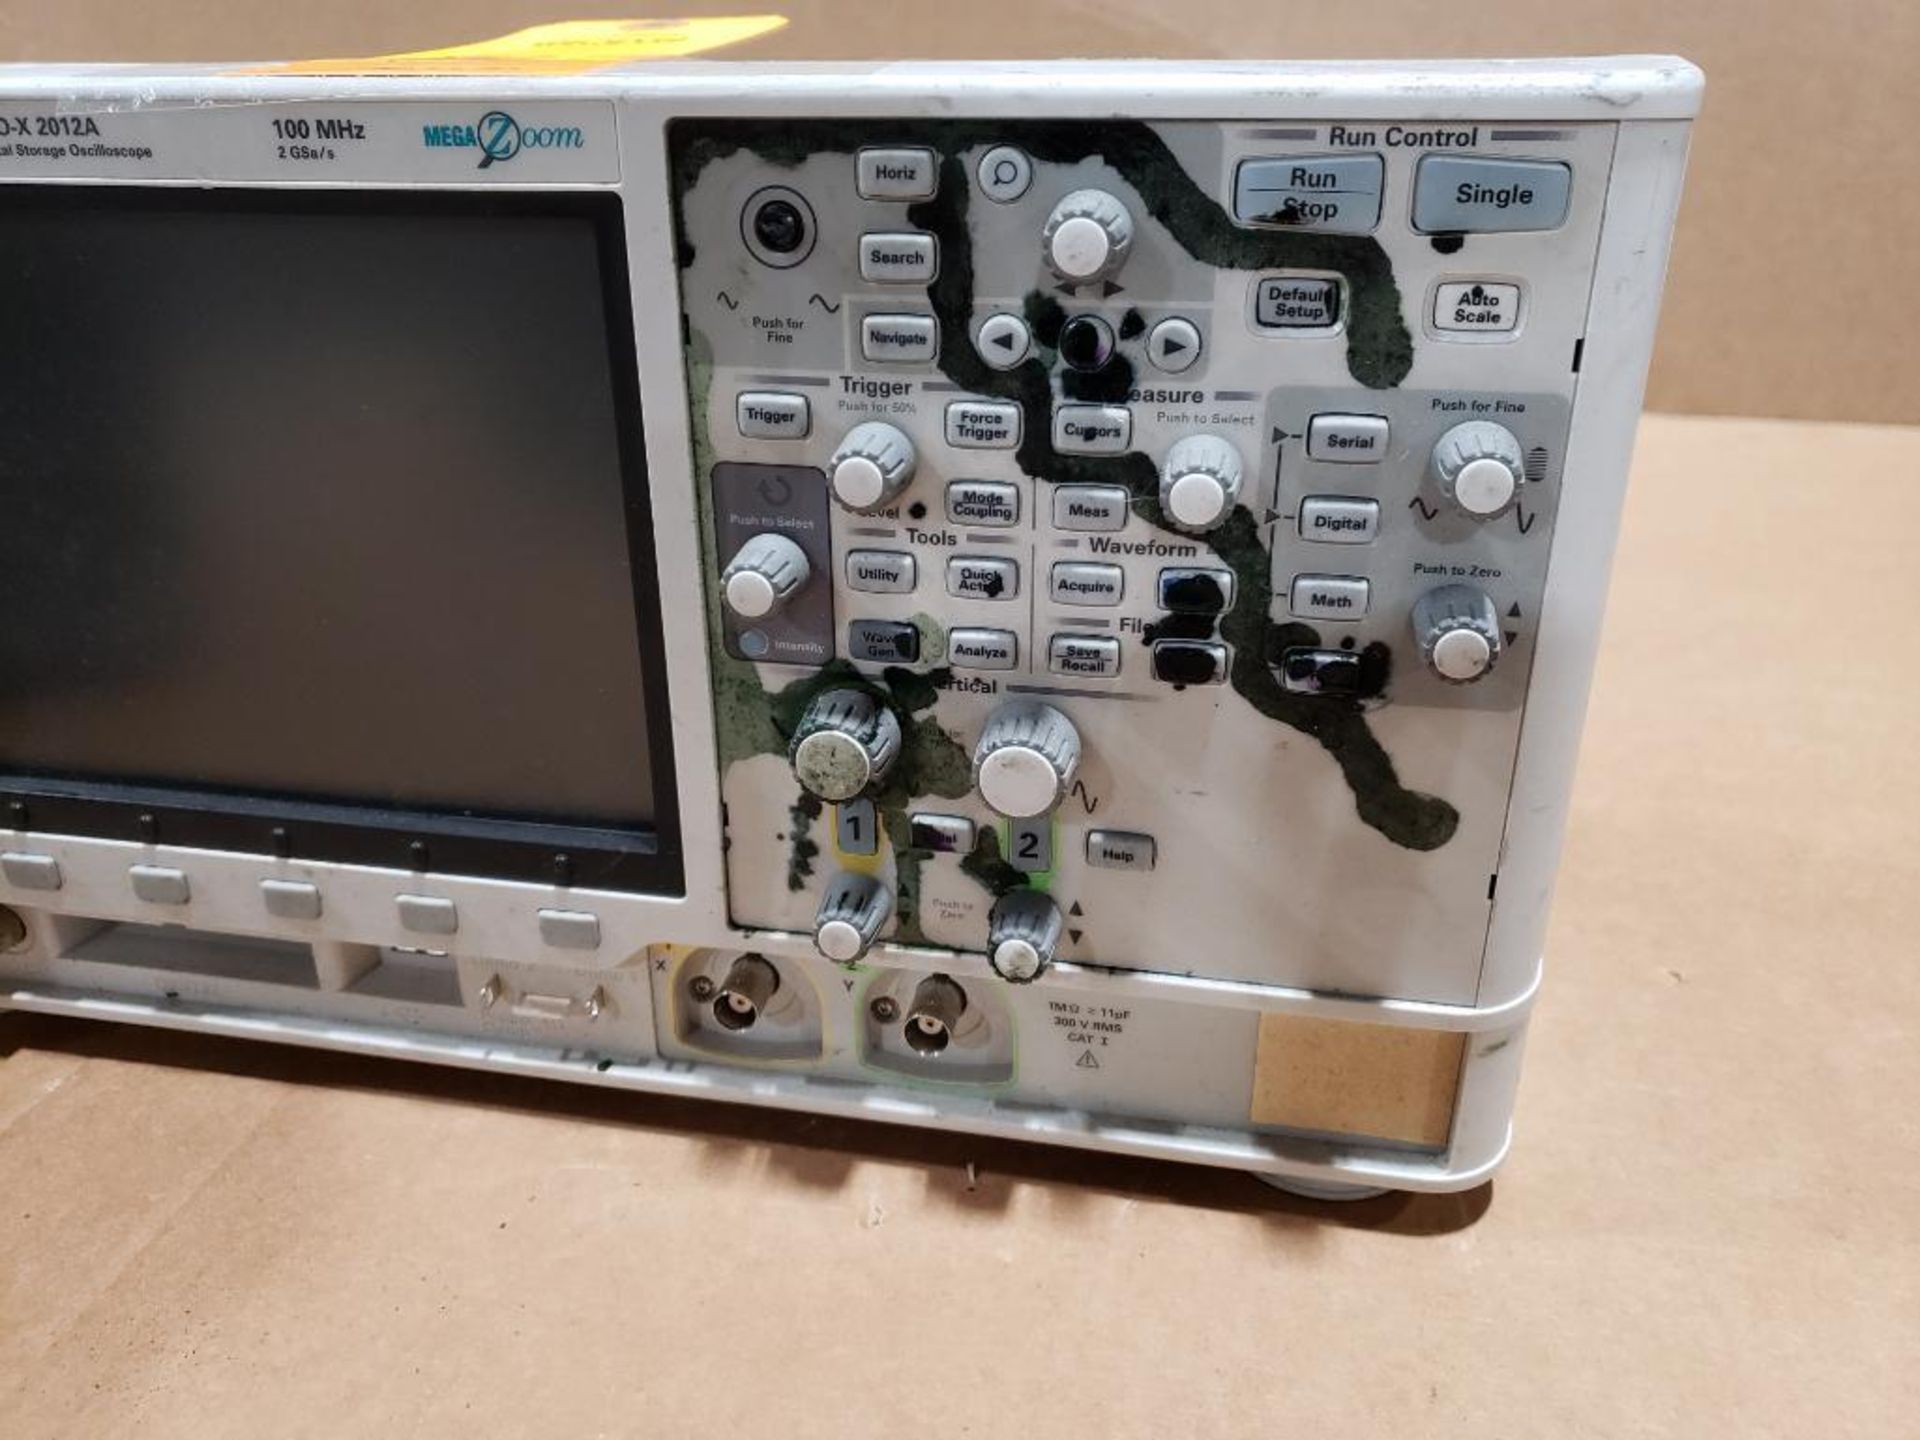 *Parts / Repairable* - Agilent Technologies Digital Oscilloscope. Part number DSO-X 2012A. - Image 4 of 11